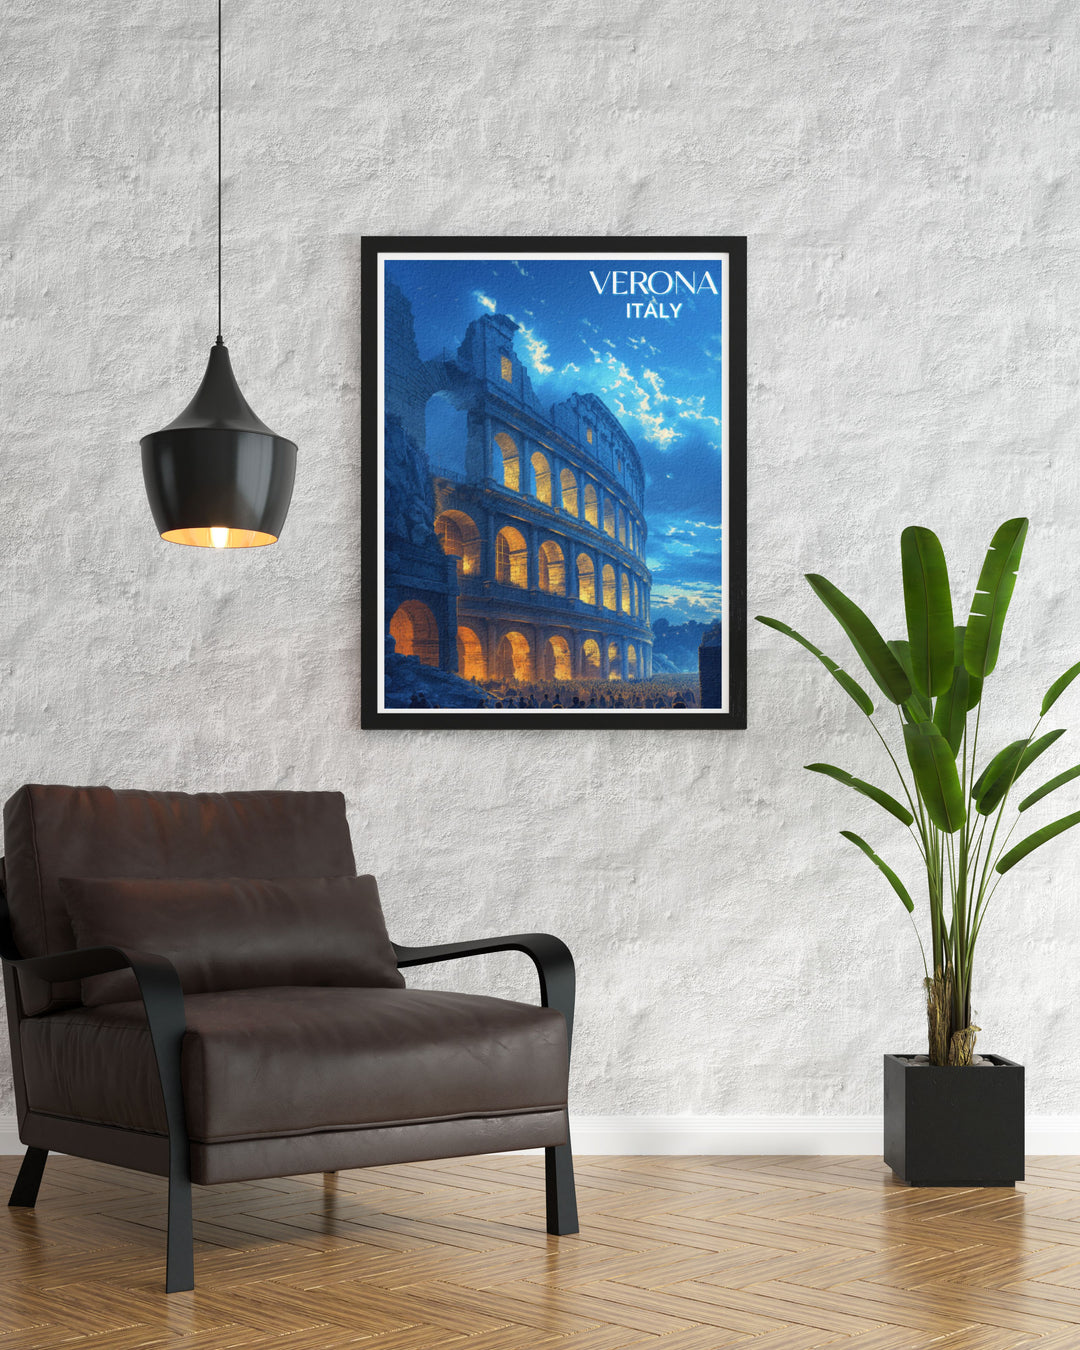 A stunning representation of the Verona Arena, this poster emphasizes the amphitheaters cultural and historical significance. Ideal for art collectors and travelers who wish to bring a piece of Veronas rich heritage into their living spaces.